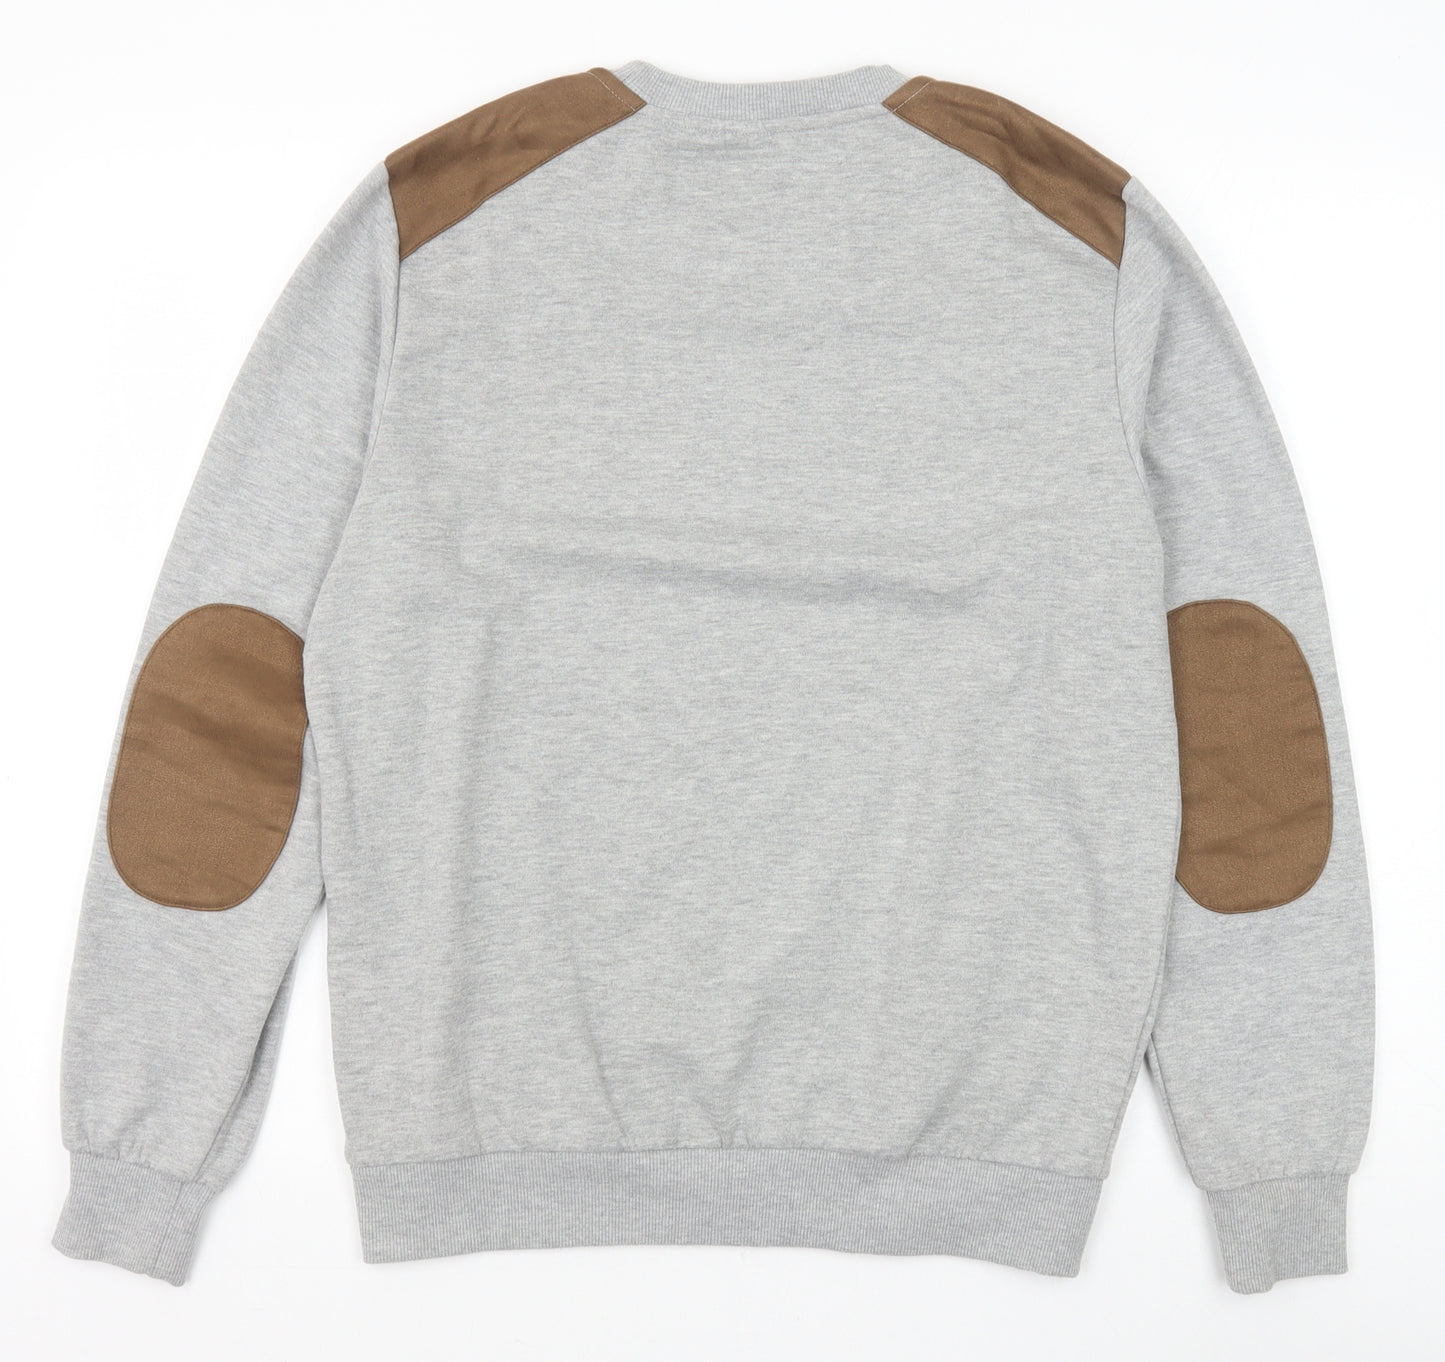 New Look Mens Grey Cotton Pullover Sweatshirt Size M - Elbow Pads